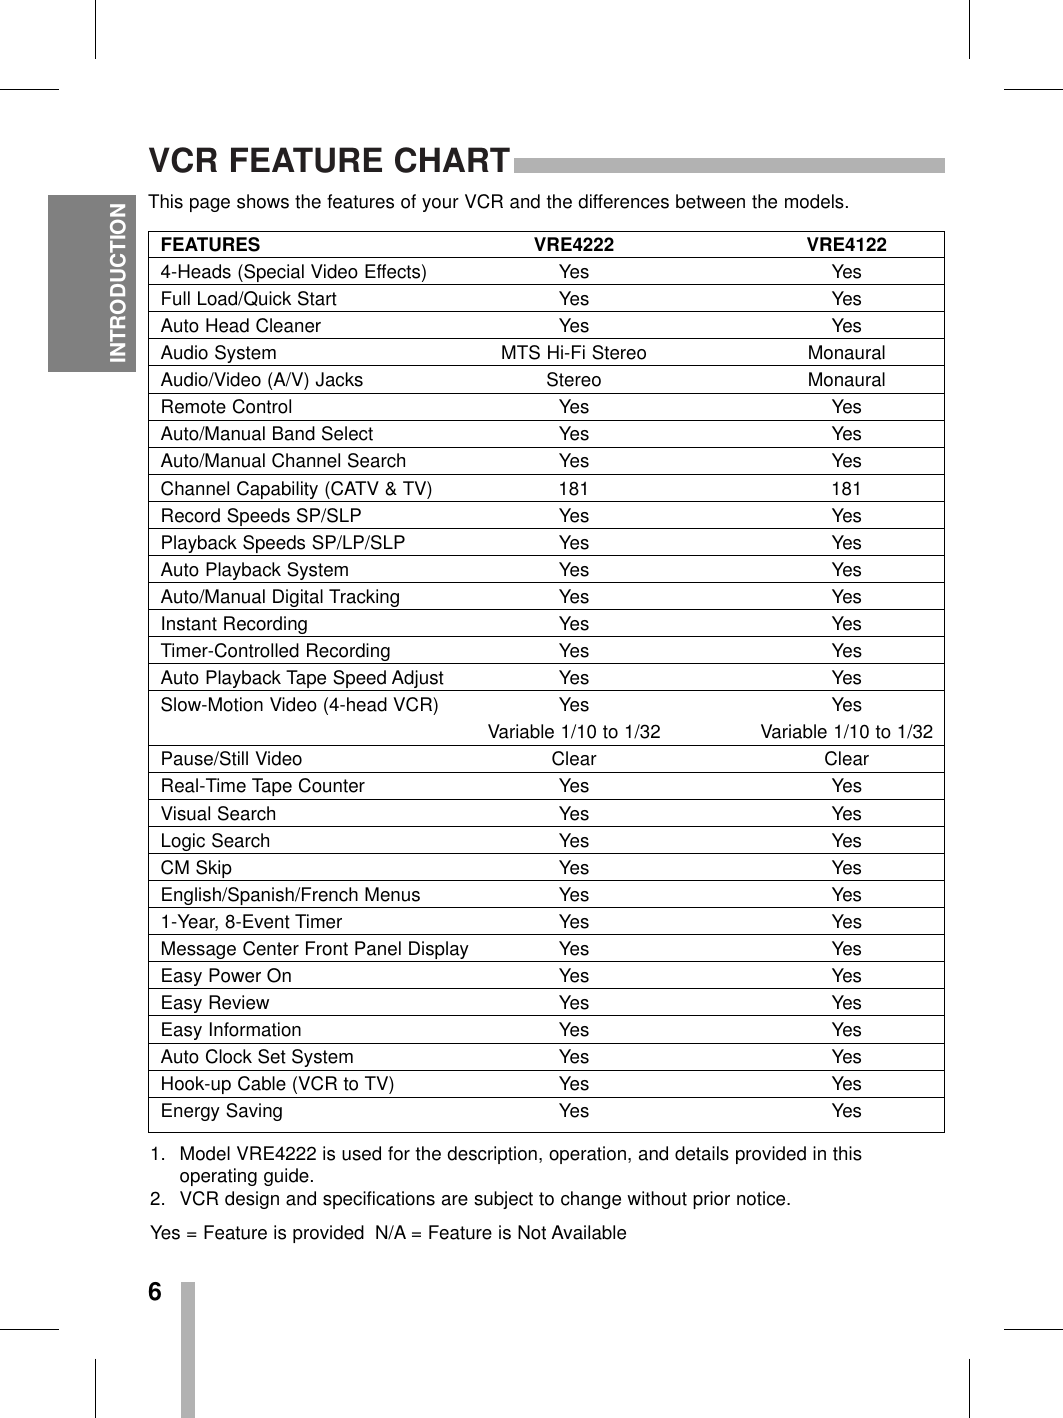 VCR FEATURE CHART6INTRODUCTIONThis page shows the features of your VCR and the differences between the models.FEATURES VRE4222 VRE41224-Heads (Special Video Effects) Yes YesFull Load/Quick Start Yes YesAuto Head Cleaner Yes YesAudio System MTS Hi-Fi Stereo MonauralAudio/Video (A/V) Jacks Stereo MonauralRemote Control  Yes YesAuto/Manual Band Select Yes YesAuto/Manual Channel Search Yes YesChannel Capability (CATV &amp; TV) 181 181Record Speeds SP/SLP Yes YesPlayback Speeds SP/LP/SLP Yes YesAuto Playback System Yes YesAuto/Manual Digital Tracking Yes YesInstant Recording Yes YesTimer-Controlled Recording Yes YesAuto Playback Tape Speed Adjust Yes YesSlow-Motion Video (4-head VCR) Yes YesVariable 1/10 to 1/32 Variable 1/10 to 1/32Pause/Still Video Clear ClearReal-Time Tape Counter Yes YesVisual Search Yes YesLogic Search Yes YesCM Skip Yes YesEnglish/Spanish/French Menus Yes Yes1-Year, 8-Event Timer Yes YesMessage Center Front Panel Display Yes YesEasy Power On Yes YesEasy Review Yes YesEasy Information Yes YesAuto Clock Set System Yes YesHook-up Cable (VCR to TV) Yes YesEnergy Saving Yes Yes1. Model VRE4222 is used for the description, operation, and details provided in this operating guide.2. VCR design and specifications are subject to change without prior notice.Yes = Feature is provided N/A = Feature is Not Available